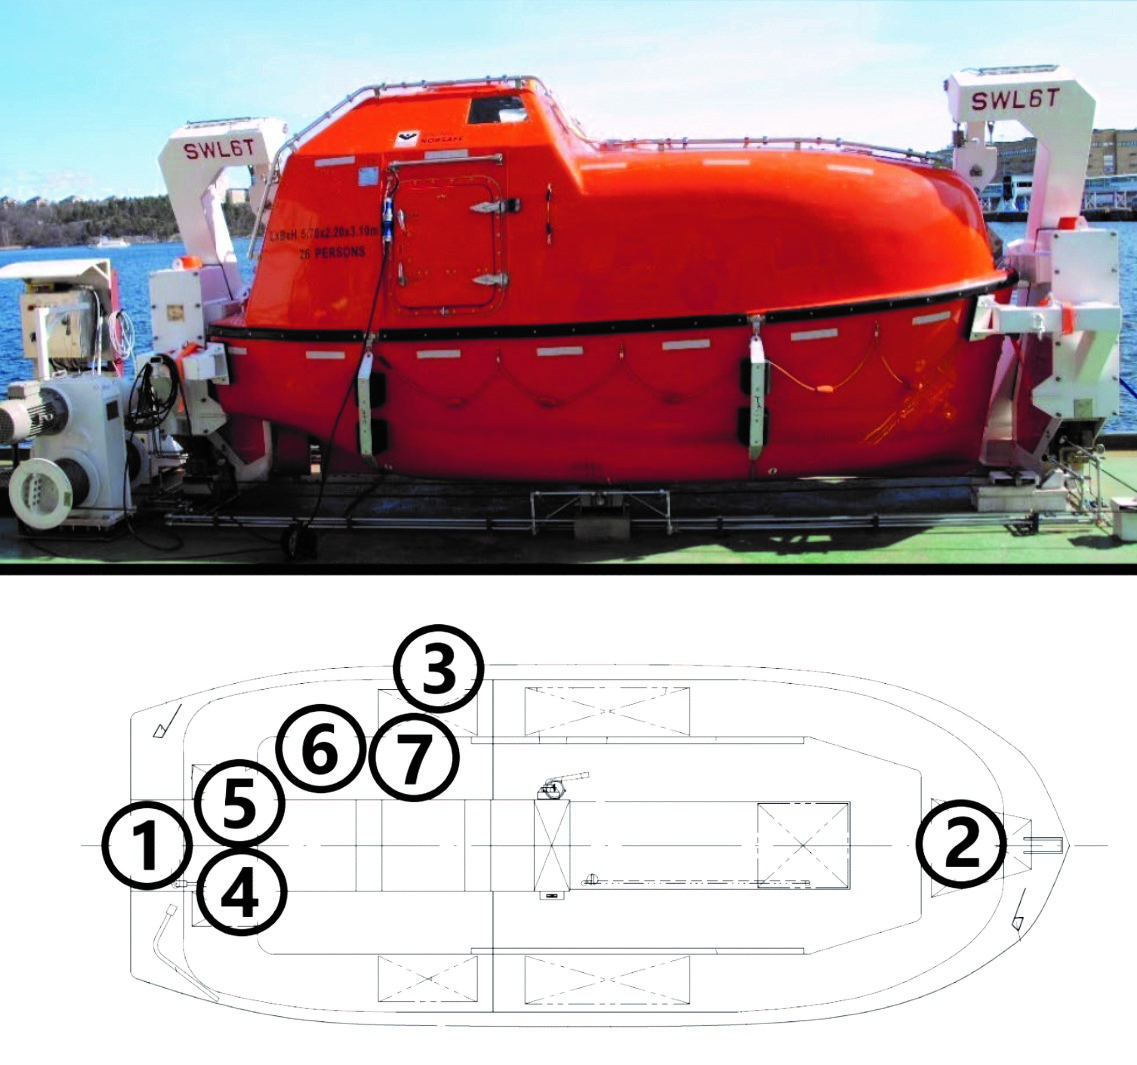 This diagram and the accompanying description show positions in the lifeboat at the time of the accident.